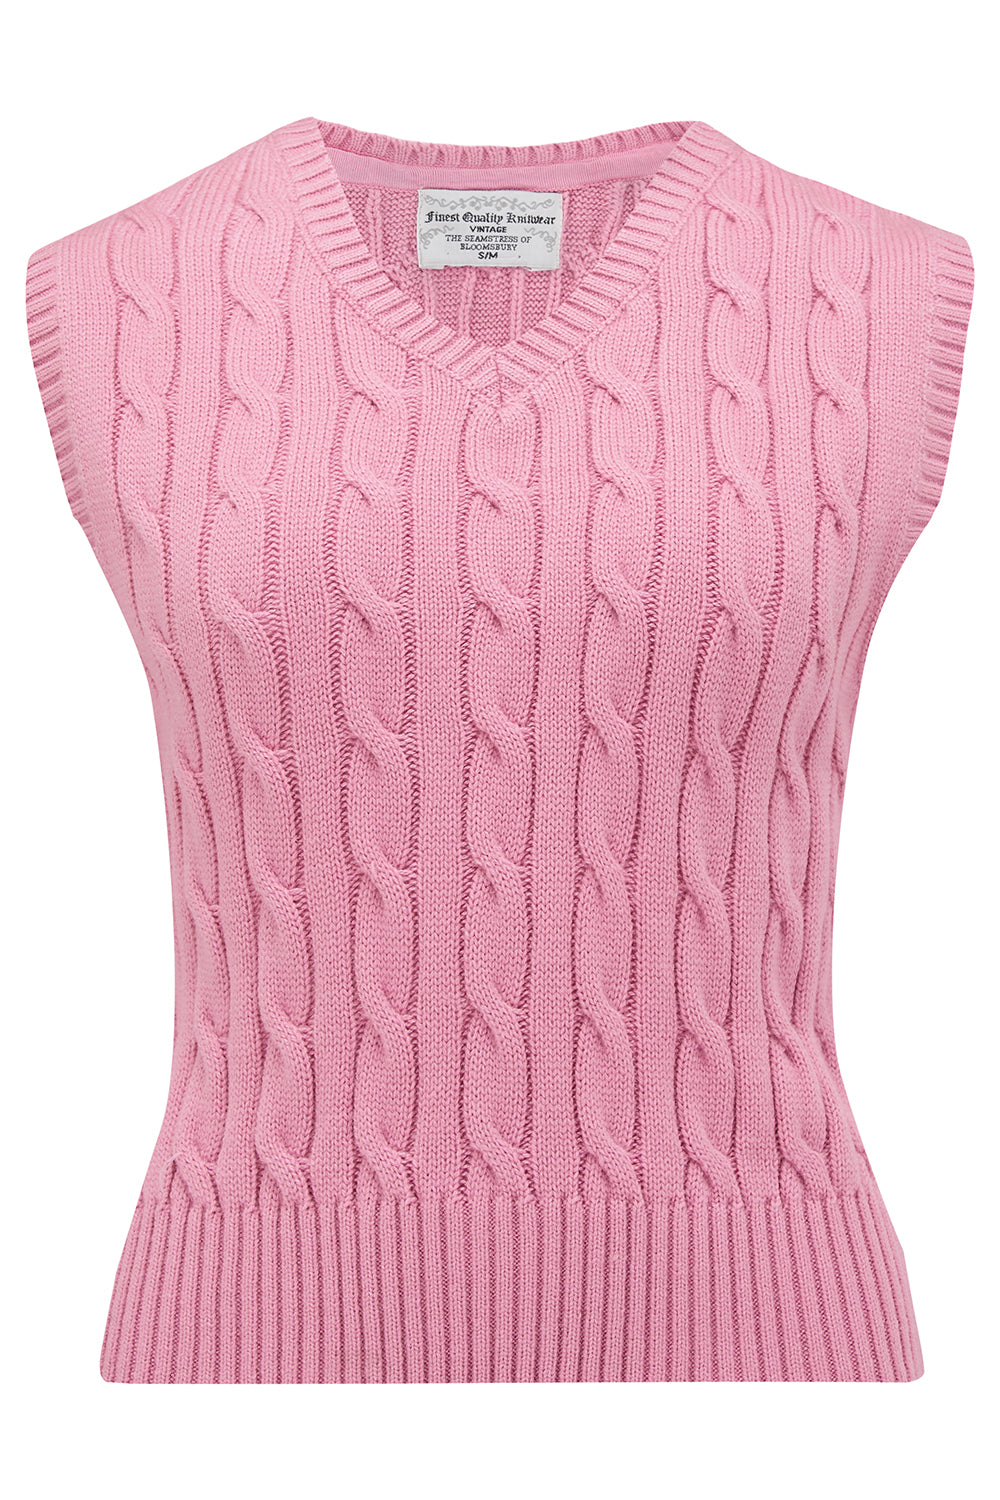 Cable Knit Slipover in Pink Lemonade, Stunning 1940s True Vintage Style - True and authentic vintage style clothing, inspired by the Classic styles of CC41 , WW2 and the fun 1950s RocknRoll era, for everyday wear plus events like Goodwood Revival, Twinwood Festival and Viva Las Vegas Rockabilly Weekend Rock n Romance The Seamstress Of Bloomsbury